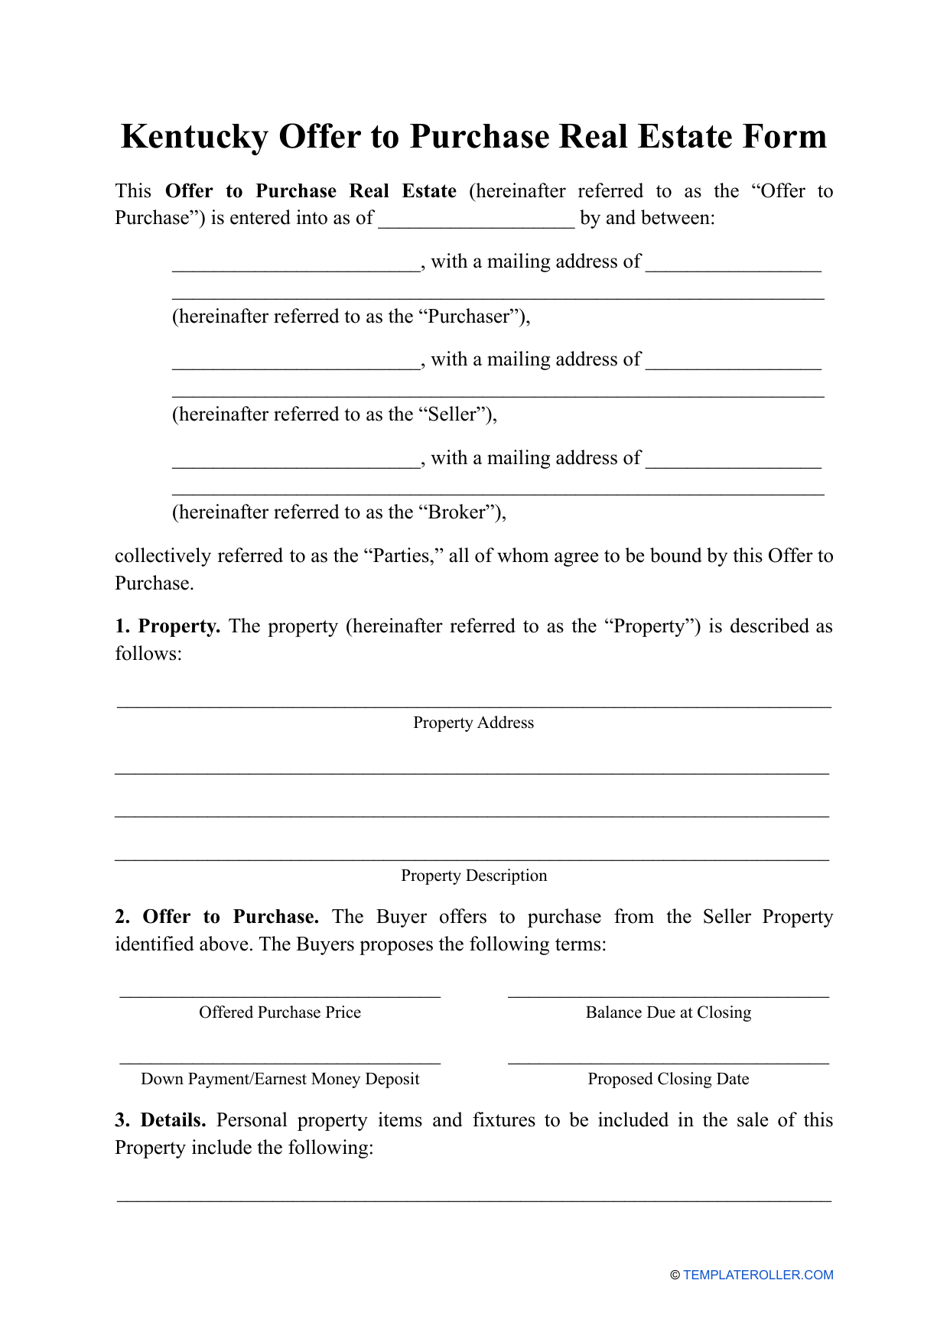 Offer to Purchase Real Estate Form - Kentucky, Page 1